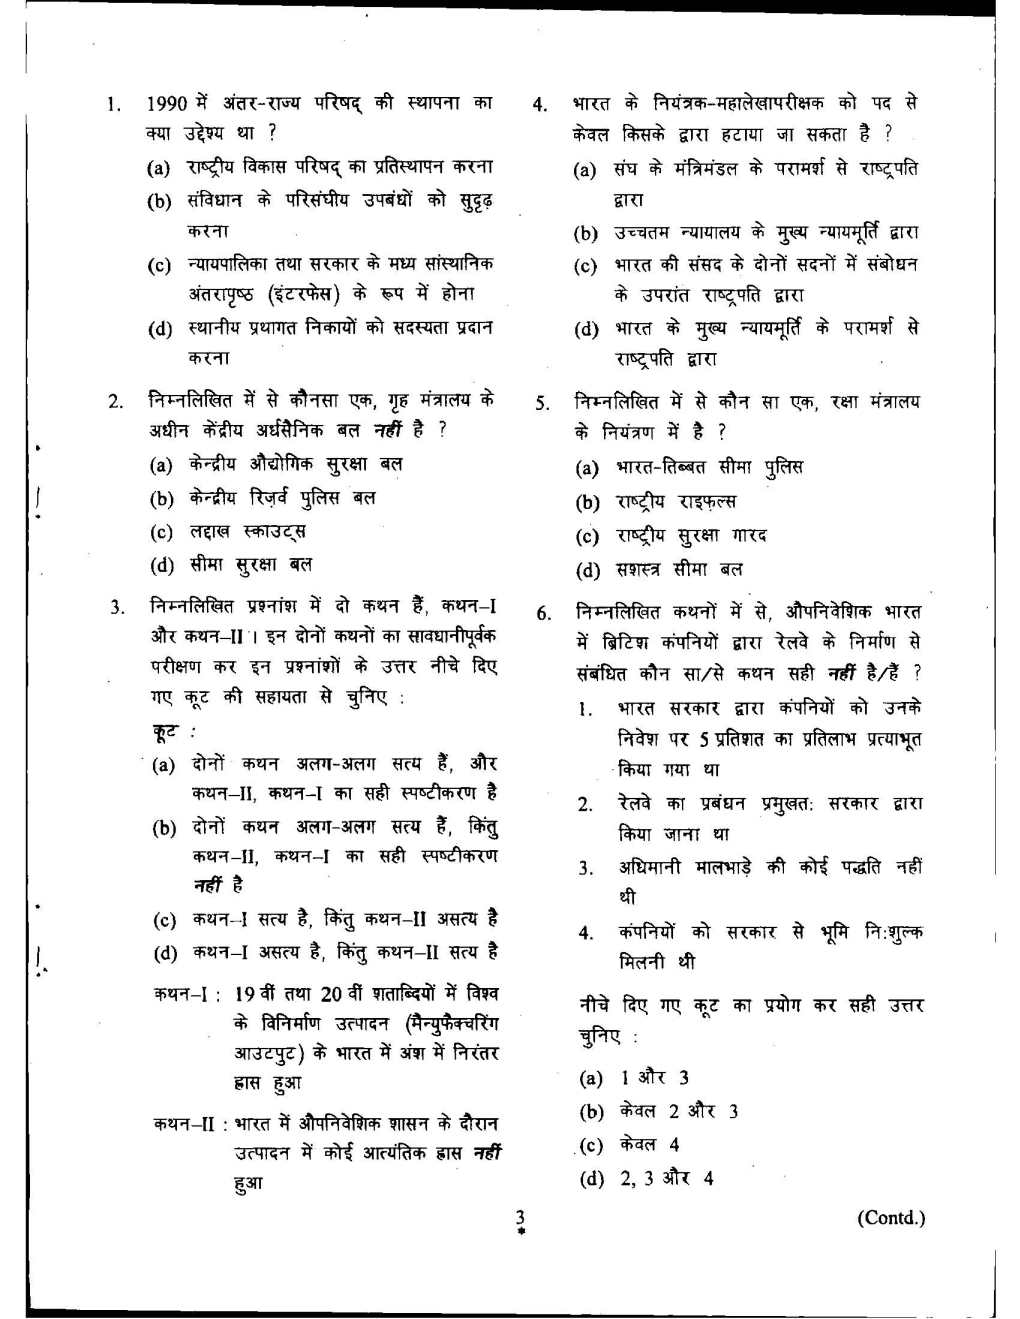 research assistant previous year question paper pdf